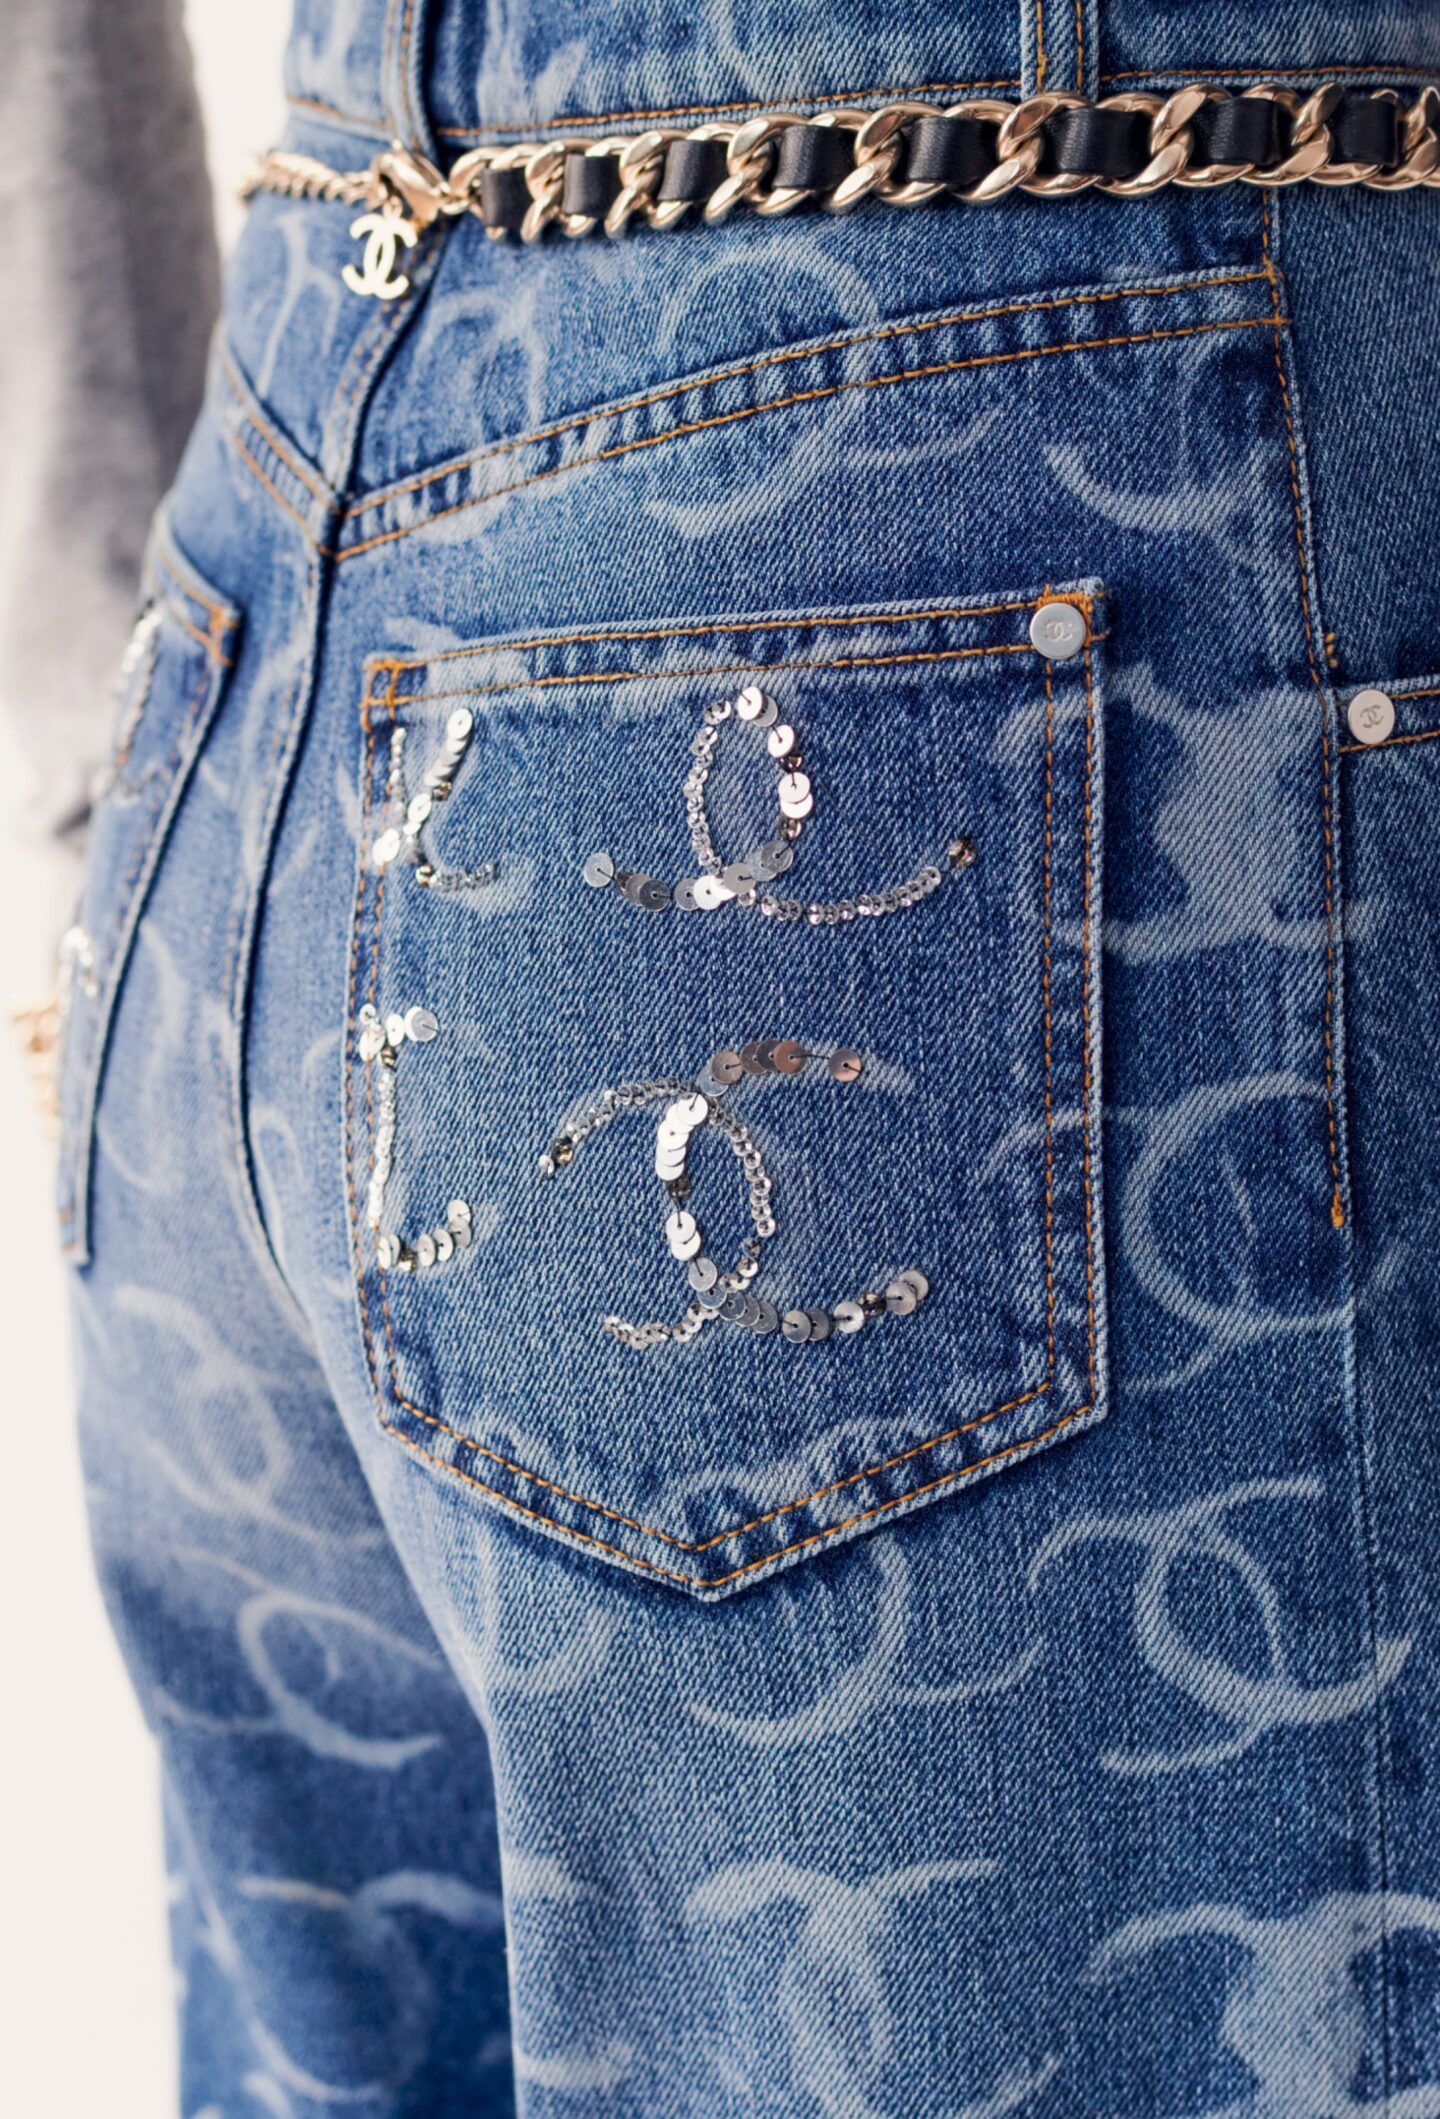 Chanel FW23 or how to elevate a pair of jeans with just a logo